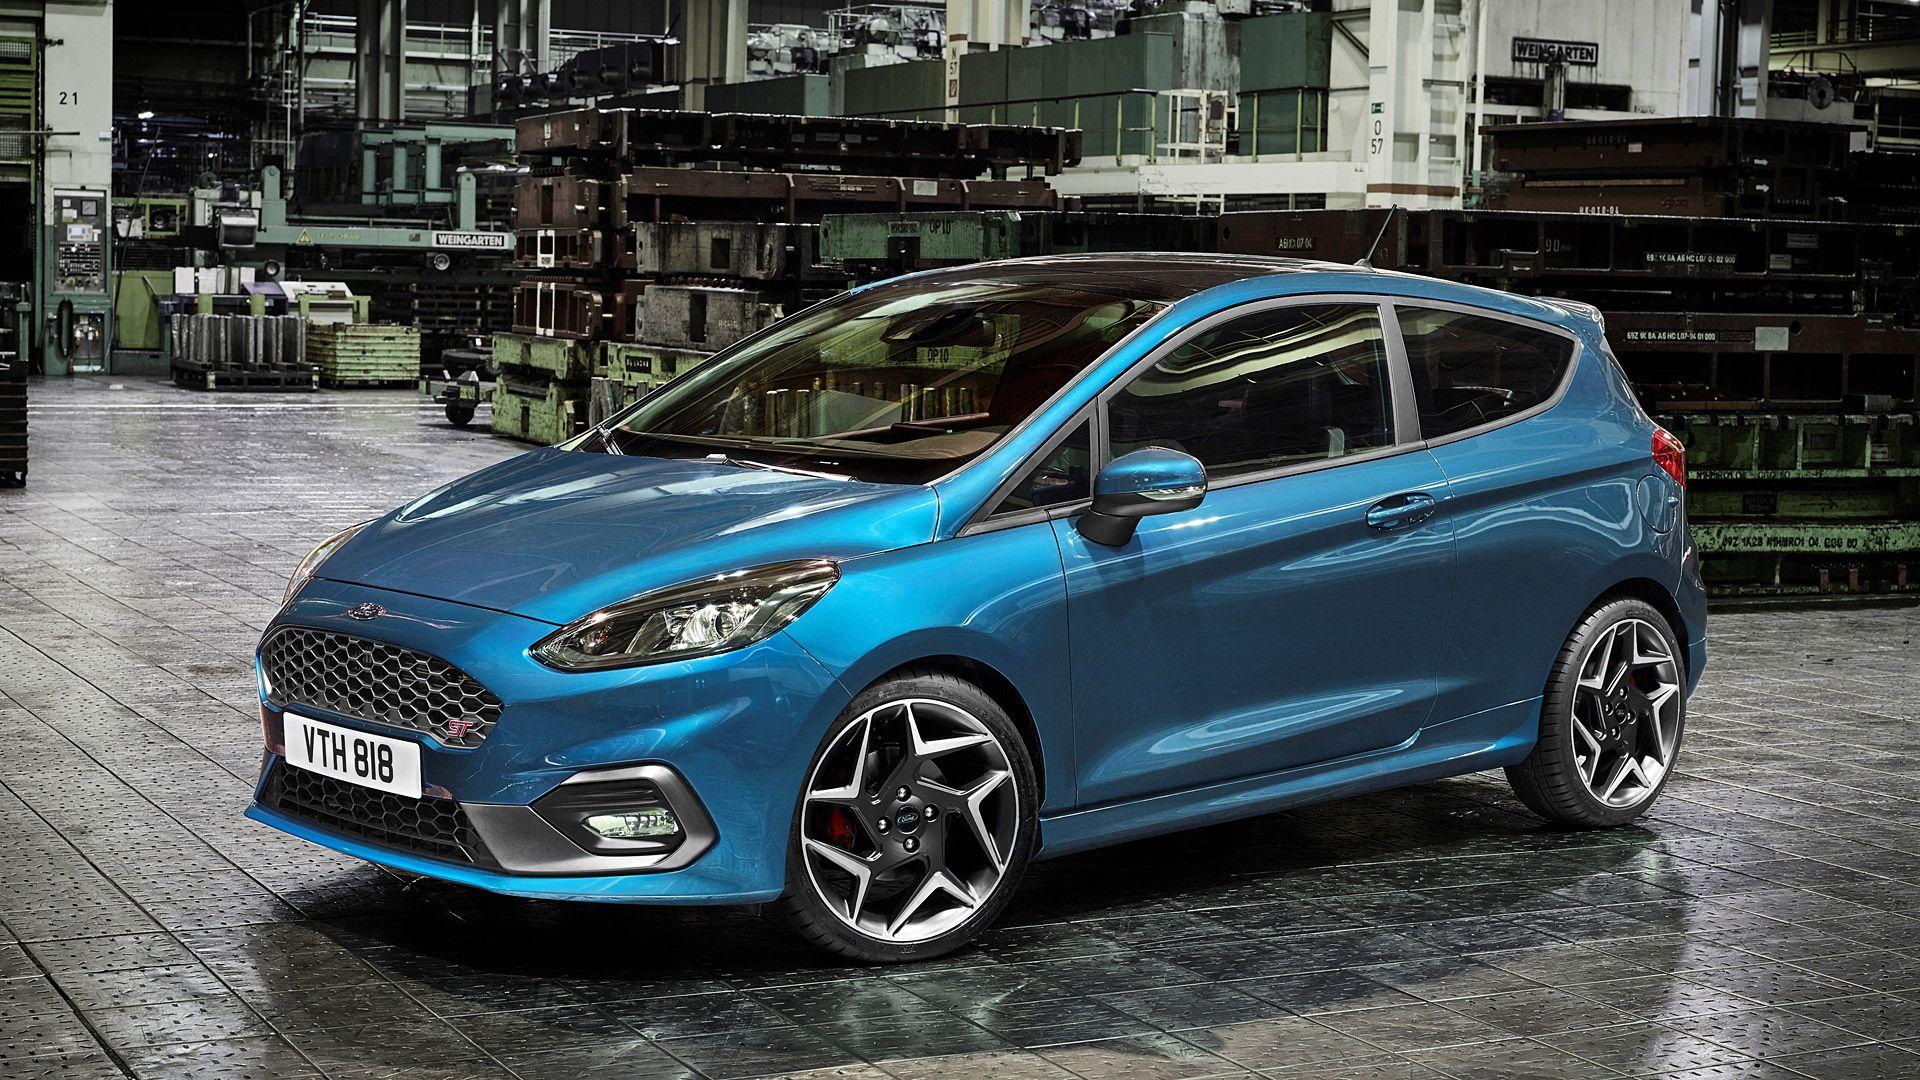 Ford Fiesta Wallpaper HD Photo, Wallpaper and other Image